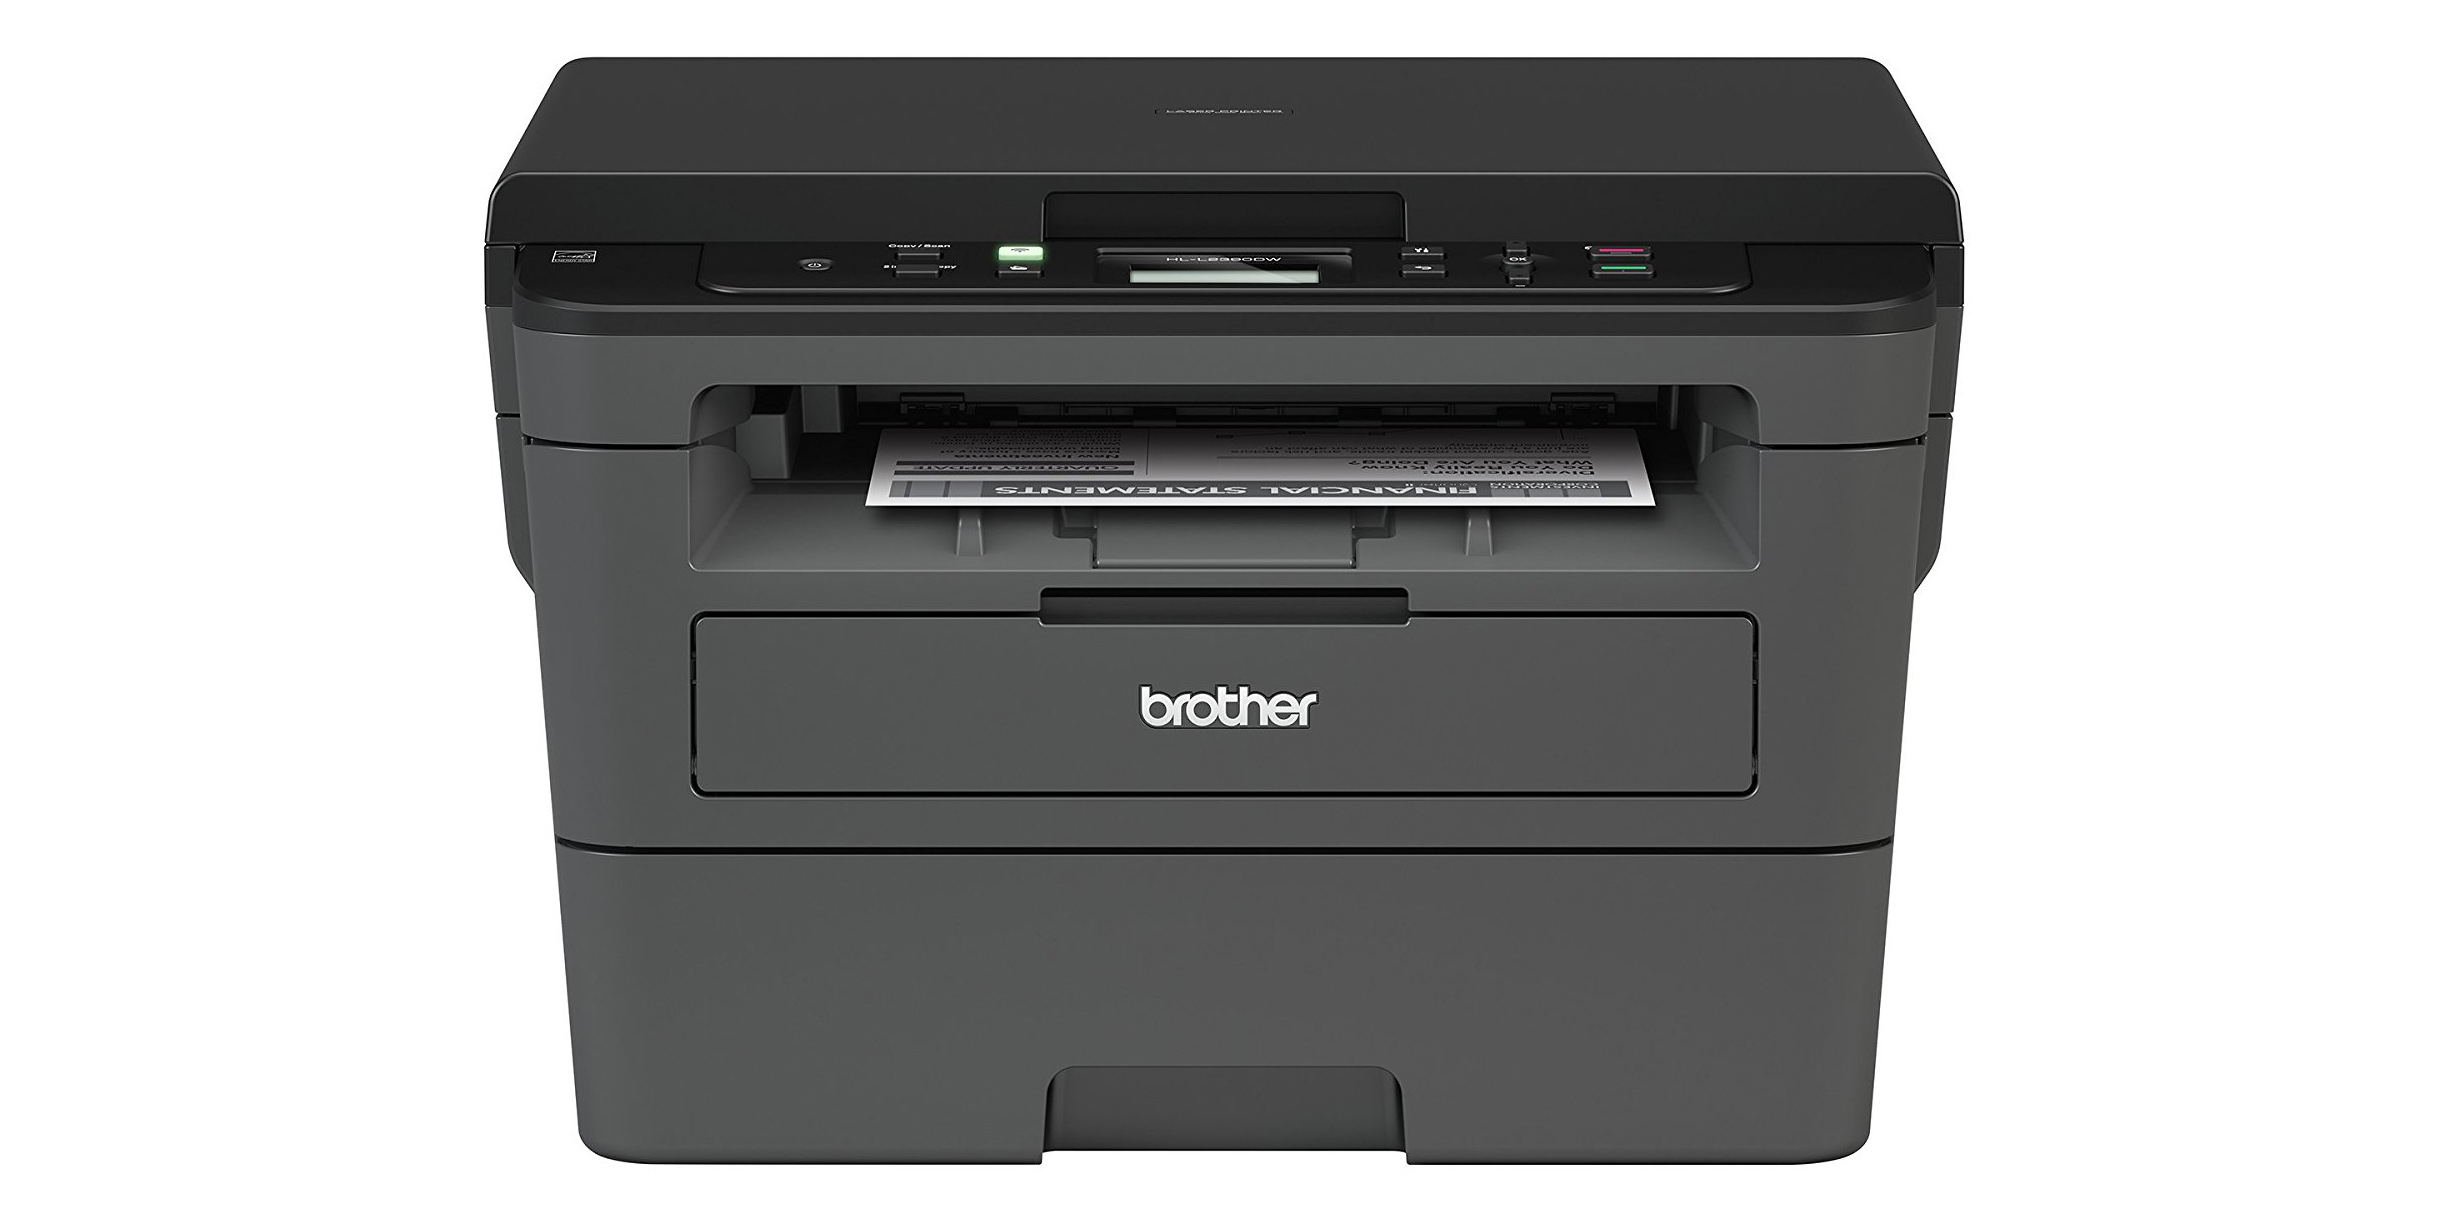 how to install brother printer on mac